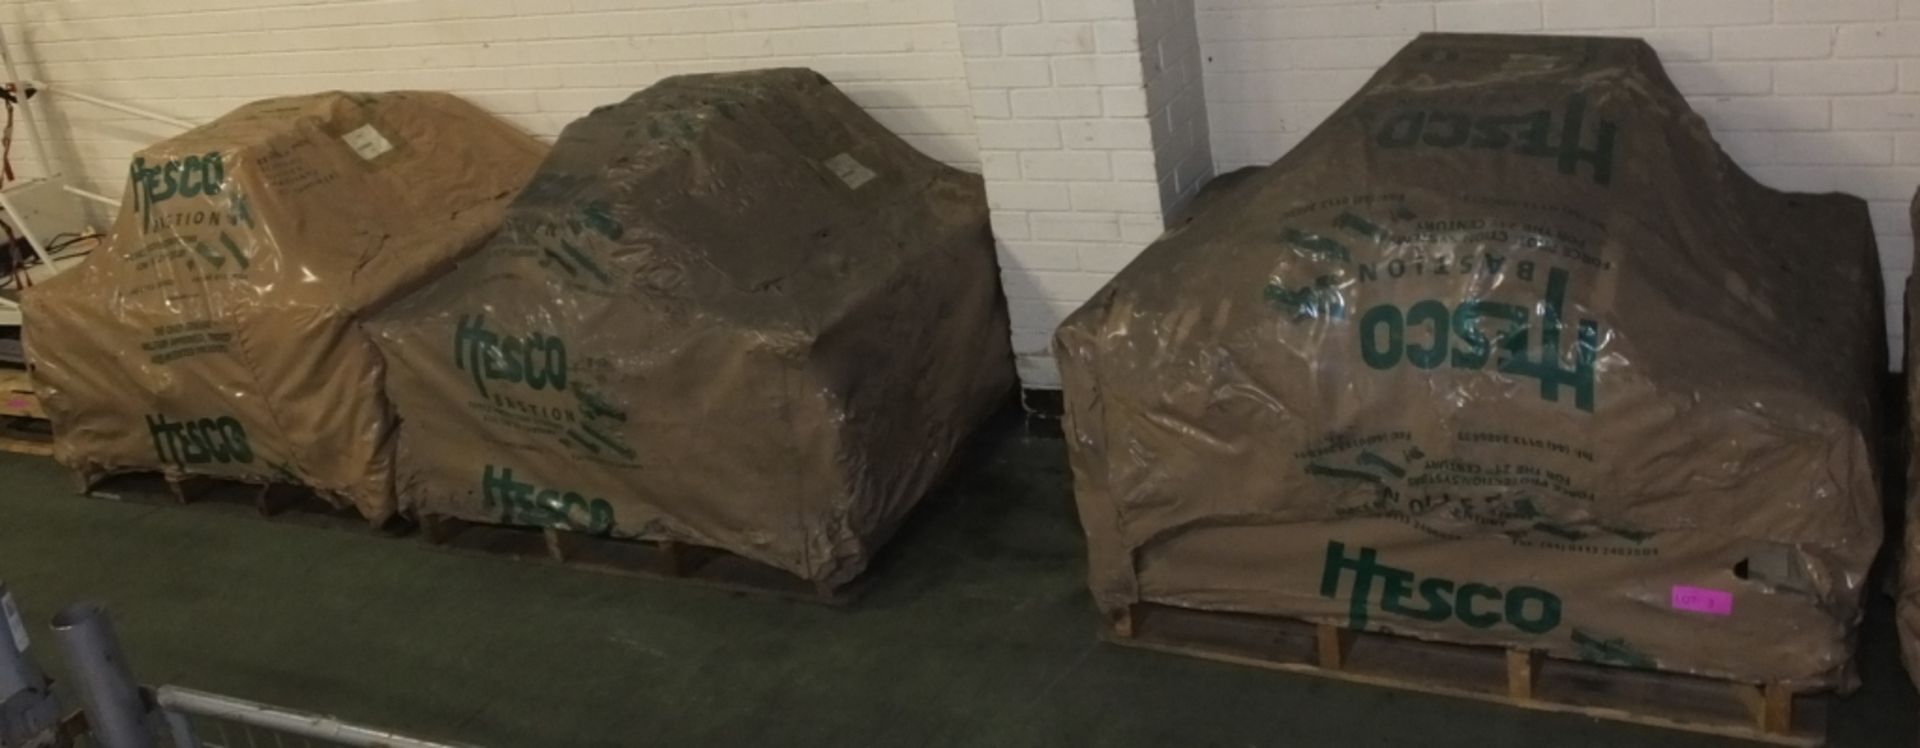 3x Hesco Bastion Sangar (Guard Post Kits) ideal for Paintball, Airsoft, Militaria - £5 lif - Image 9 of 12